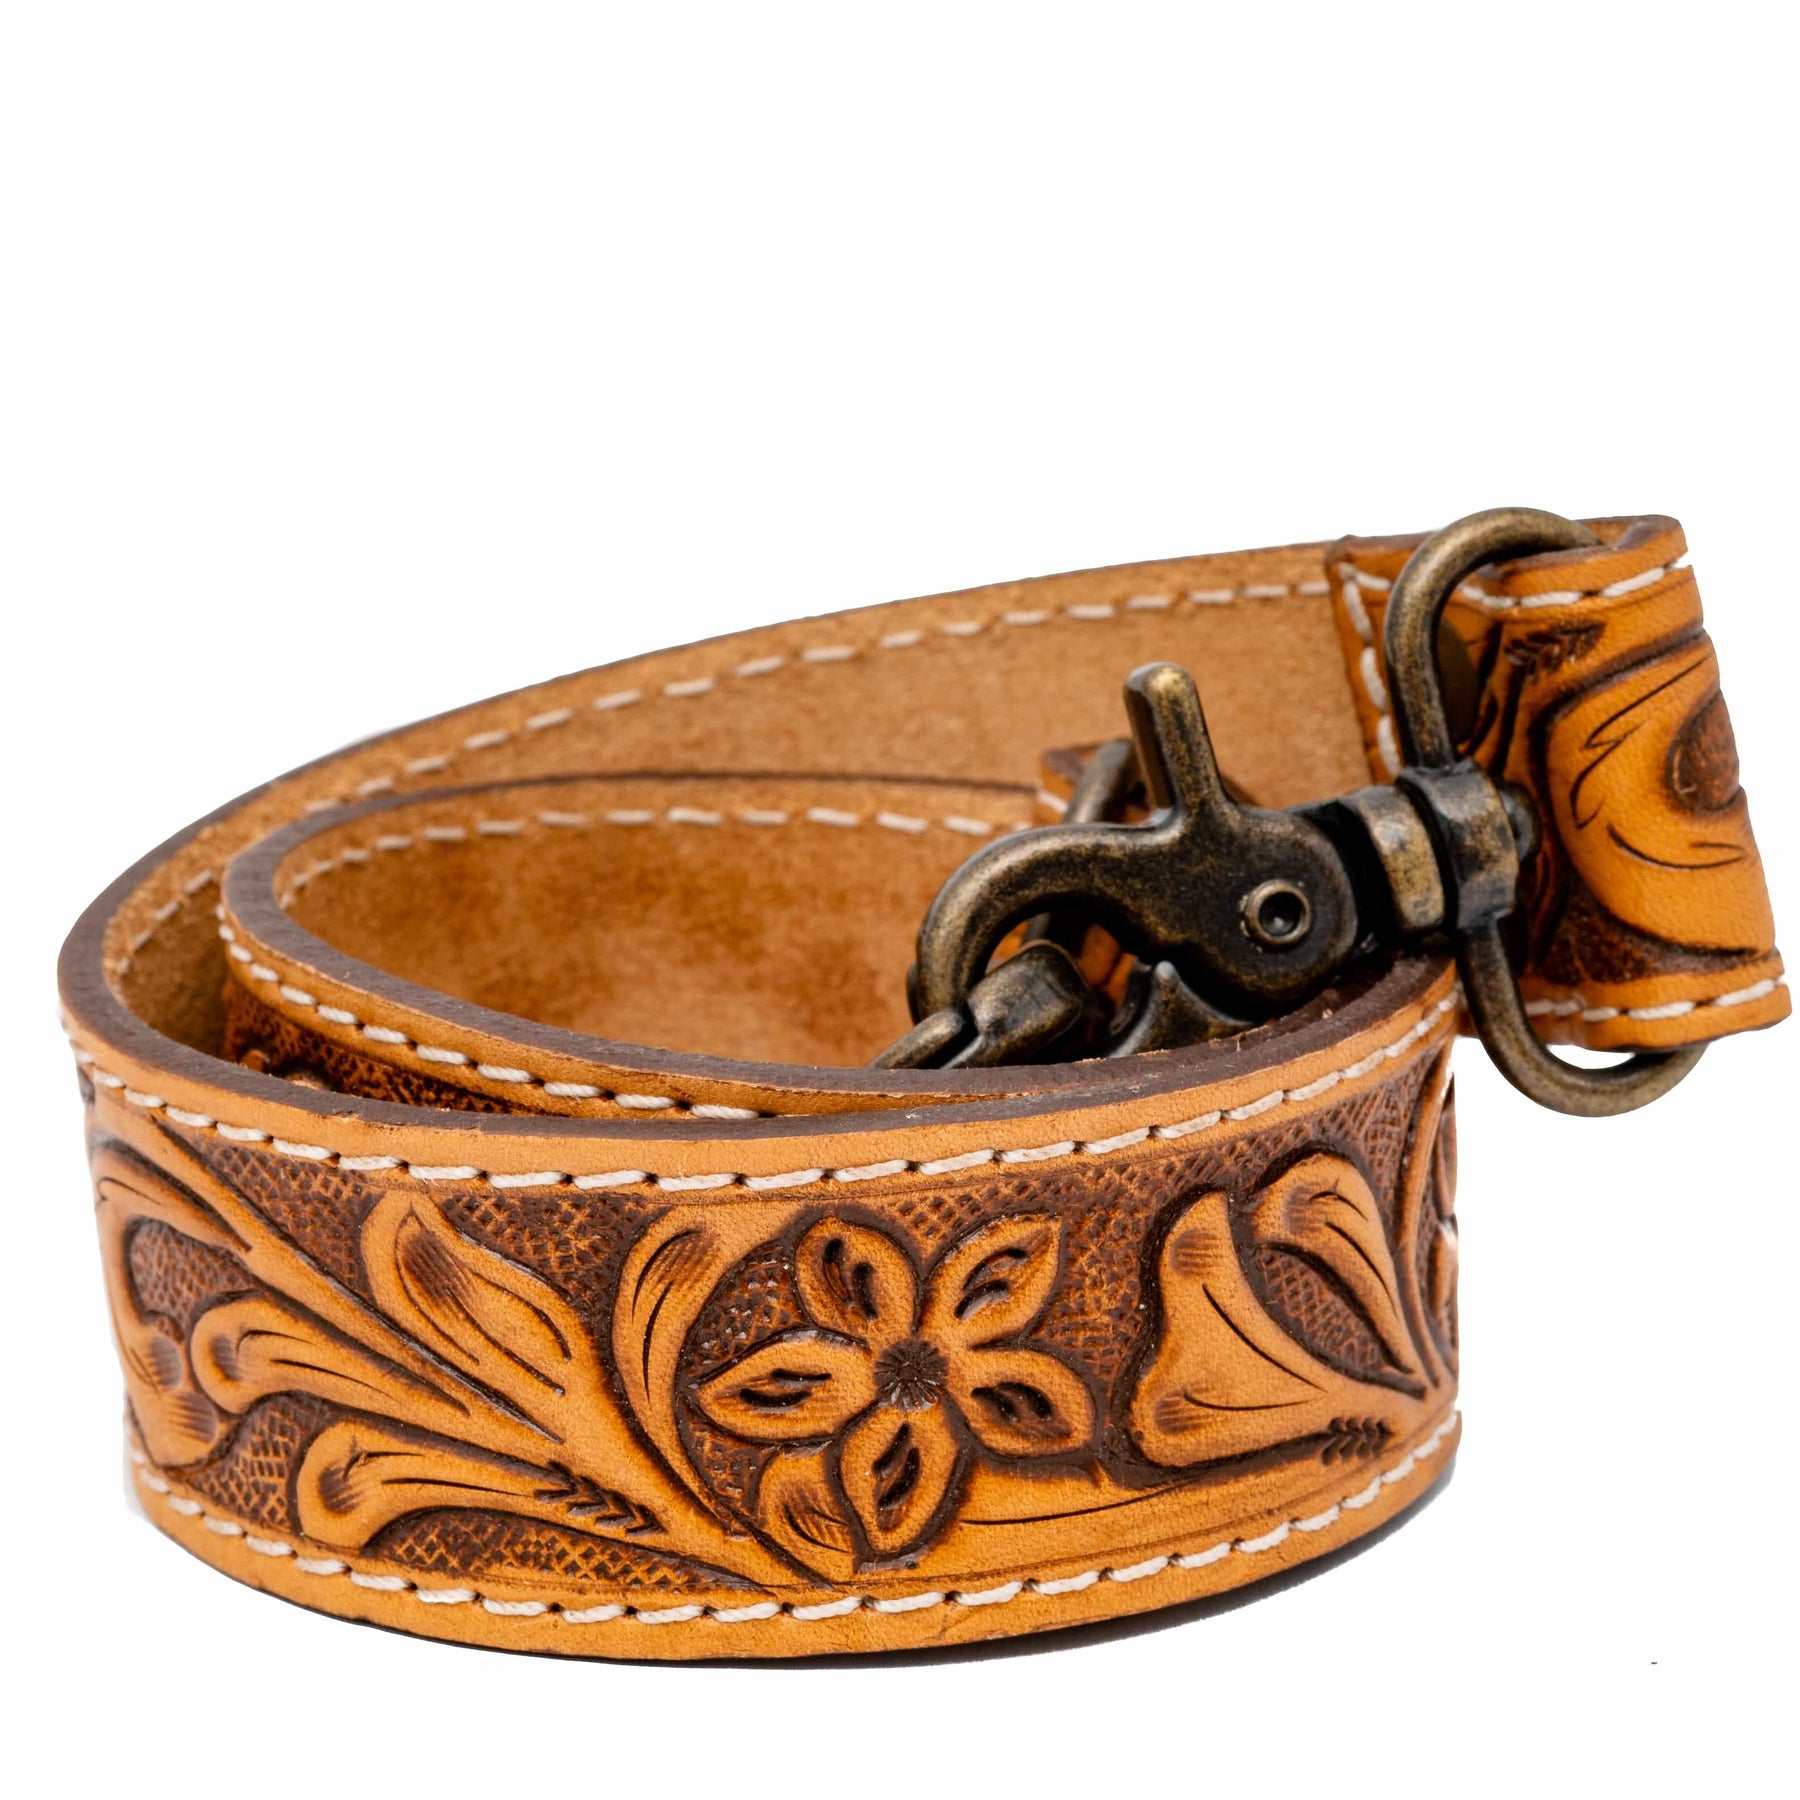 American Darling  Tooled Leather Purse Strap, Tan